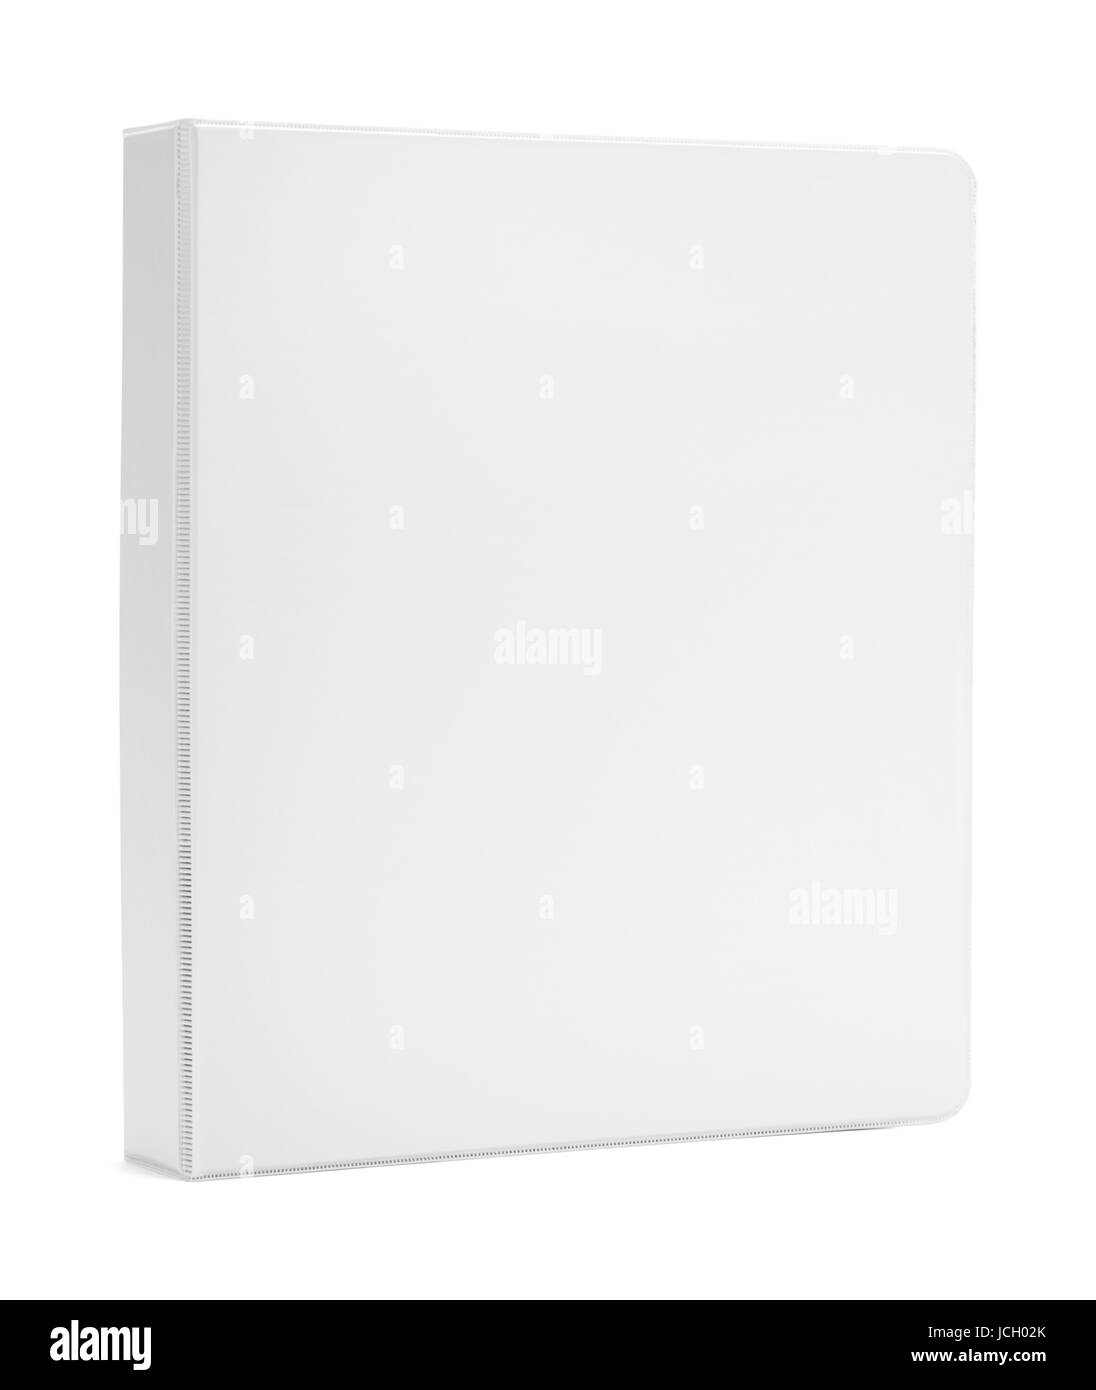 Upright Binder with Copy Space Isolated on White Background. Stock Photo